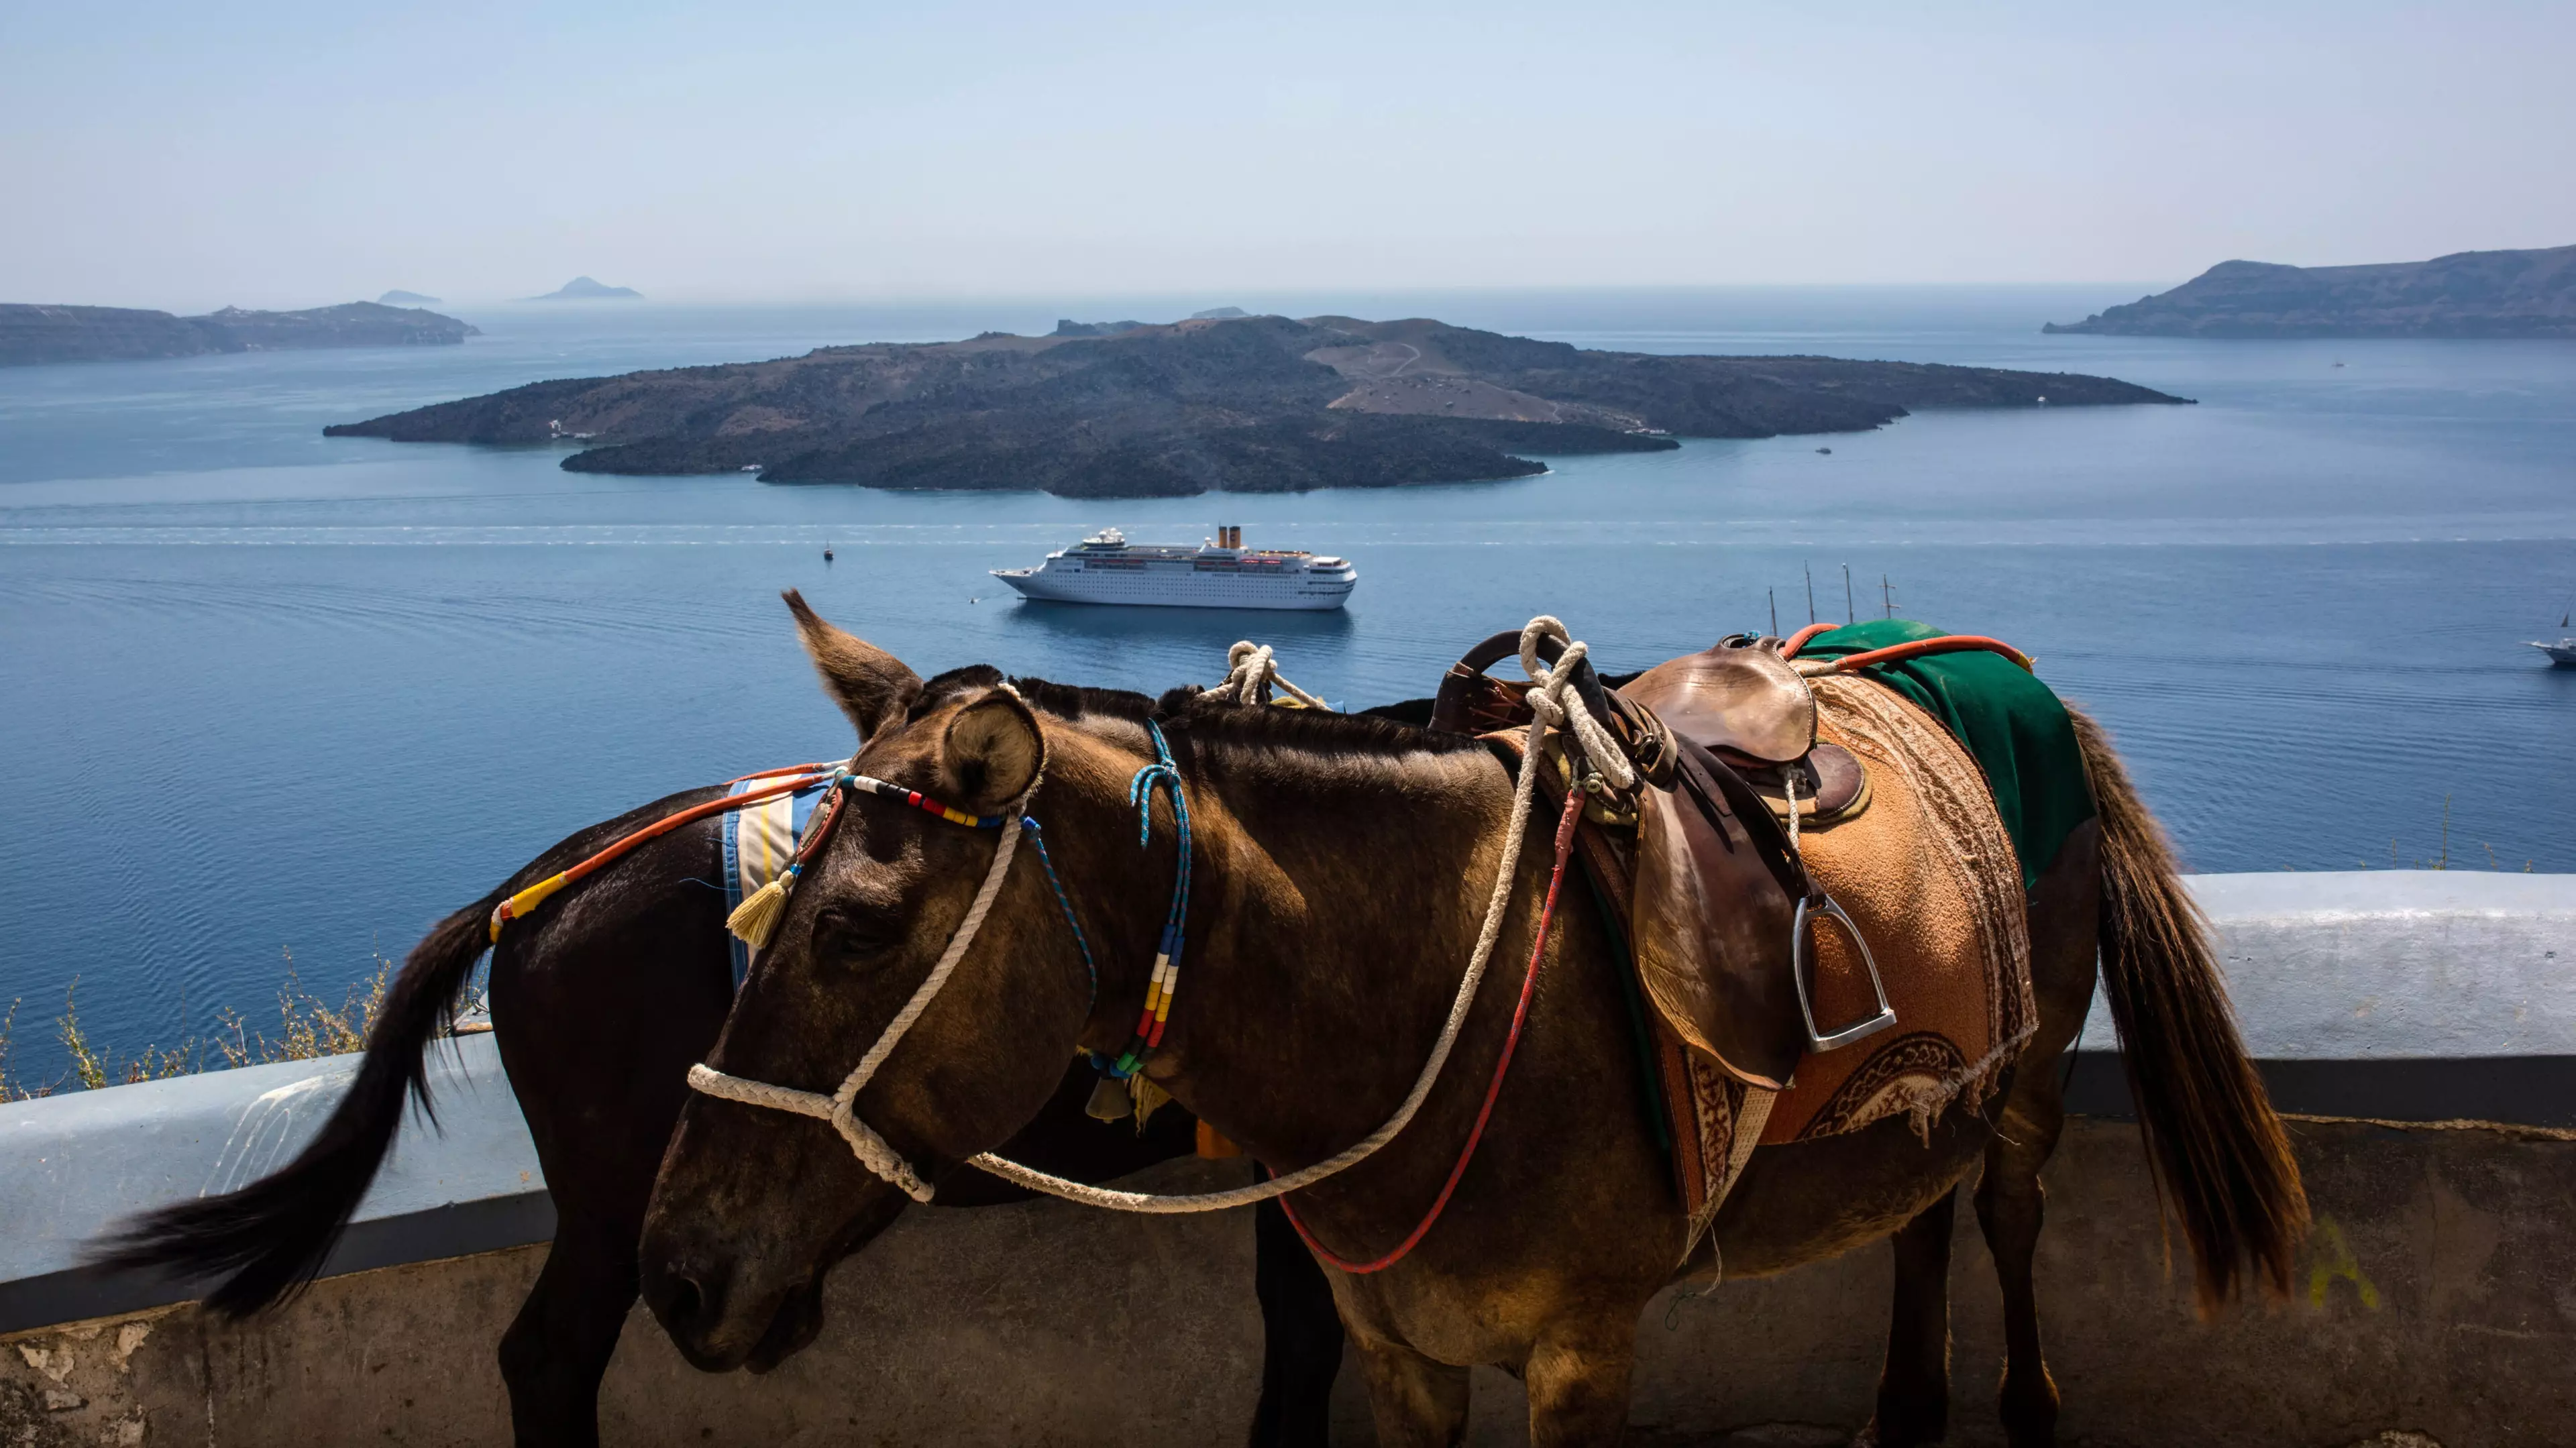 Santorini Launches Campaign To Stop Tourists Riding Donkeys Up Massive Hills